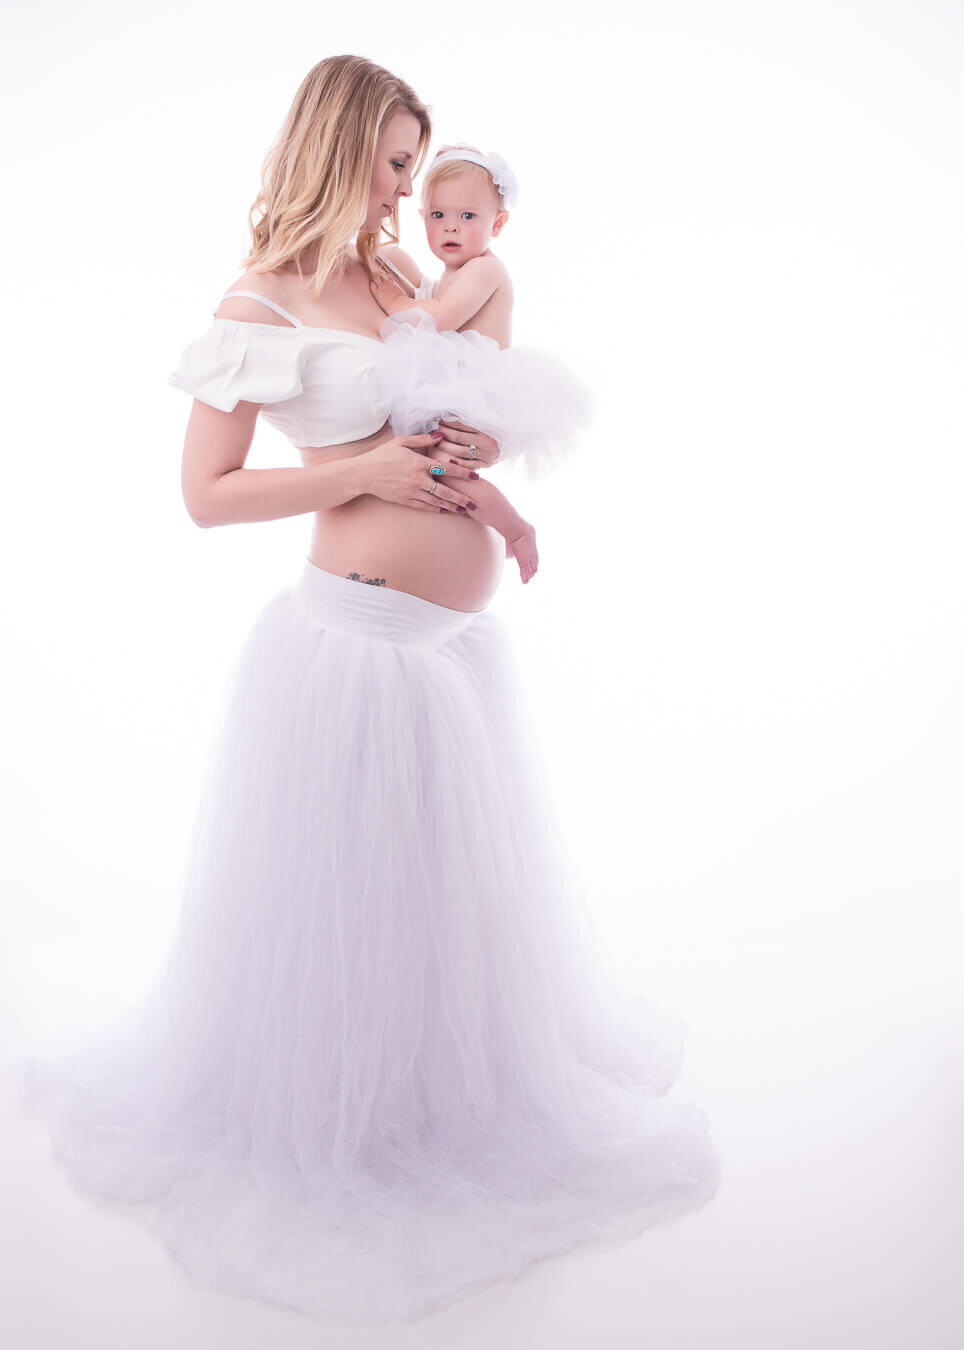 Maternity Photography studio serving Bend Or